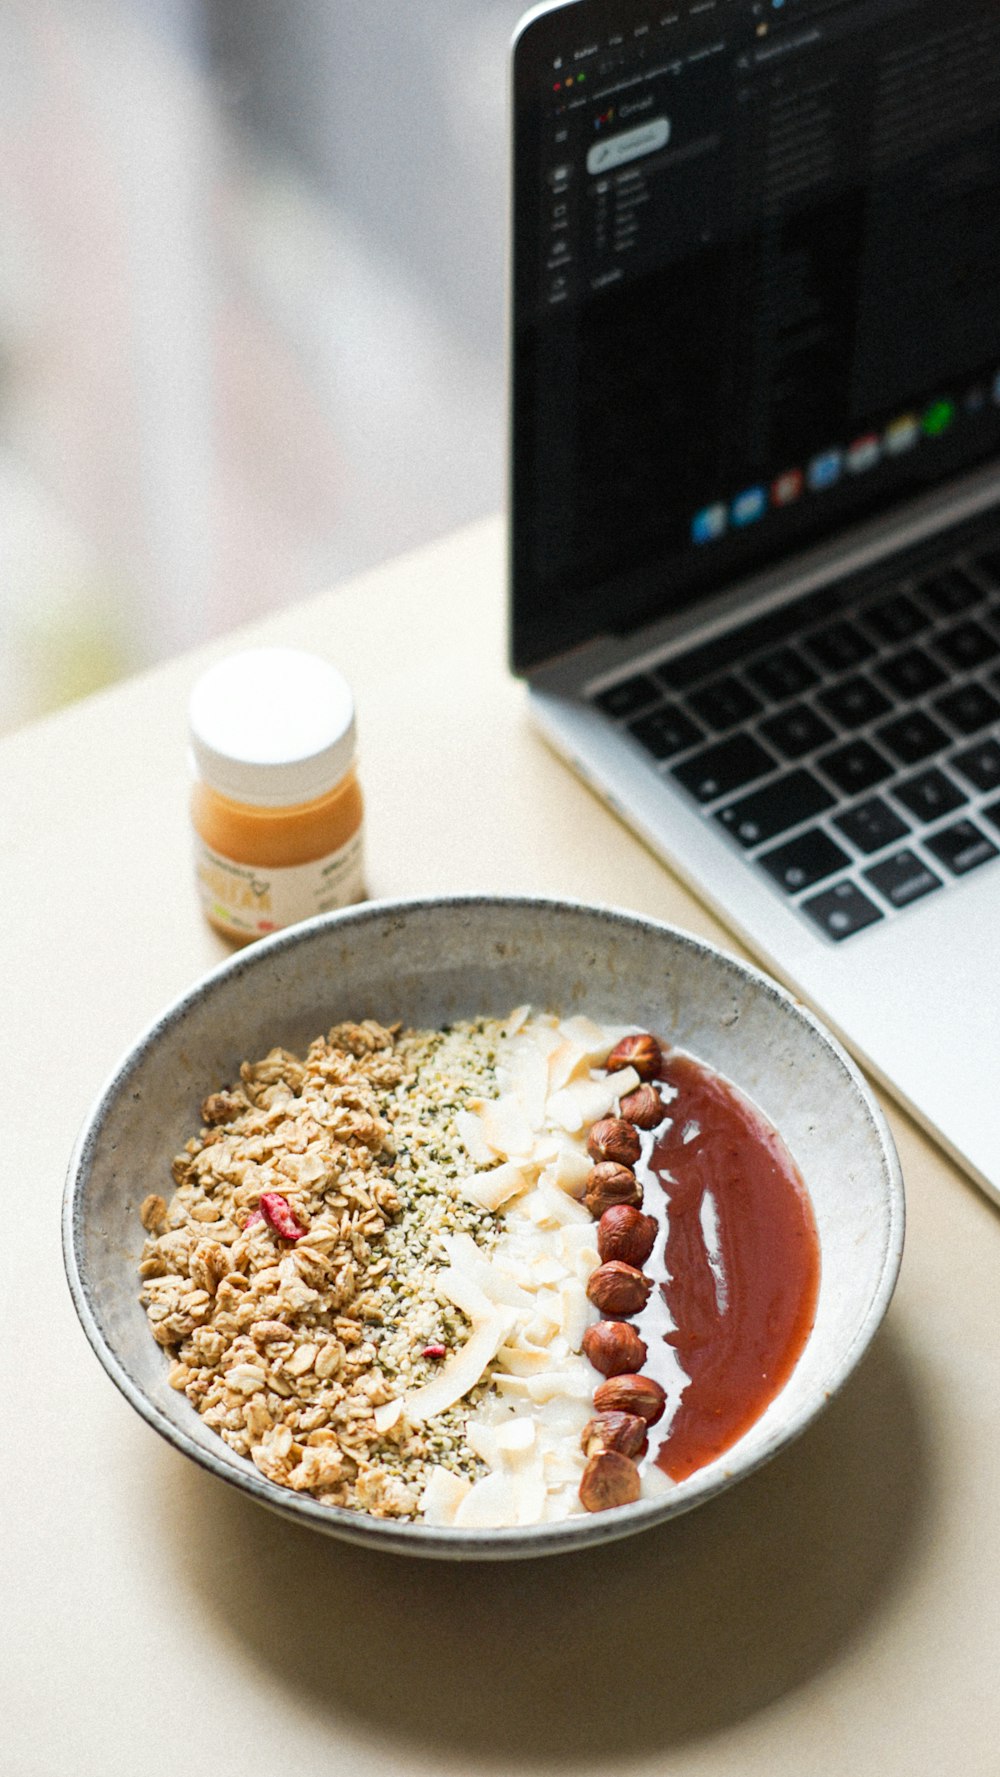 a bowl of food next to a laptop on a table